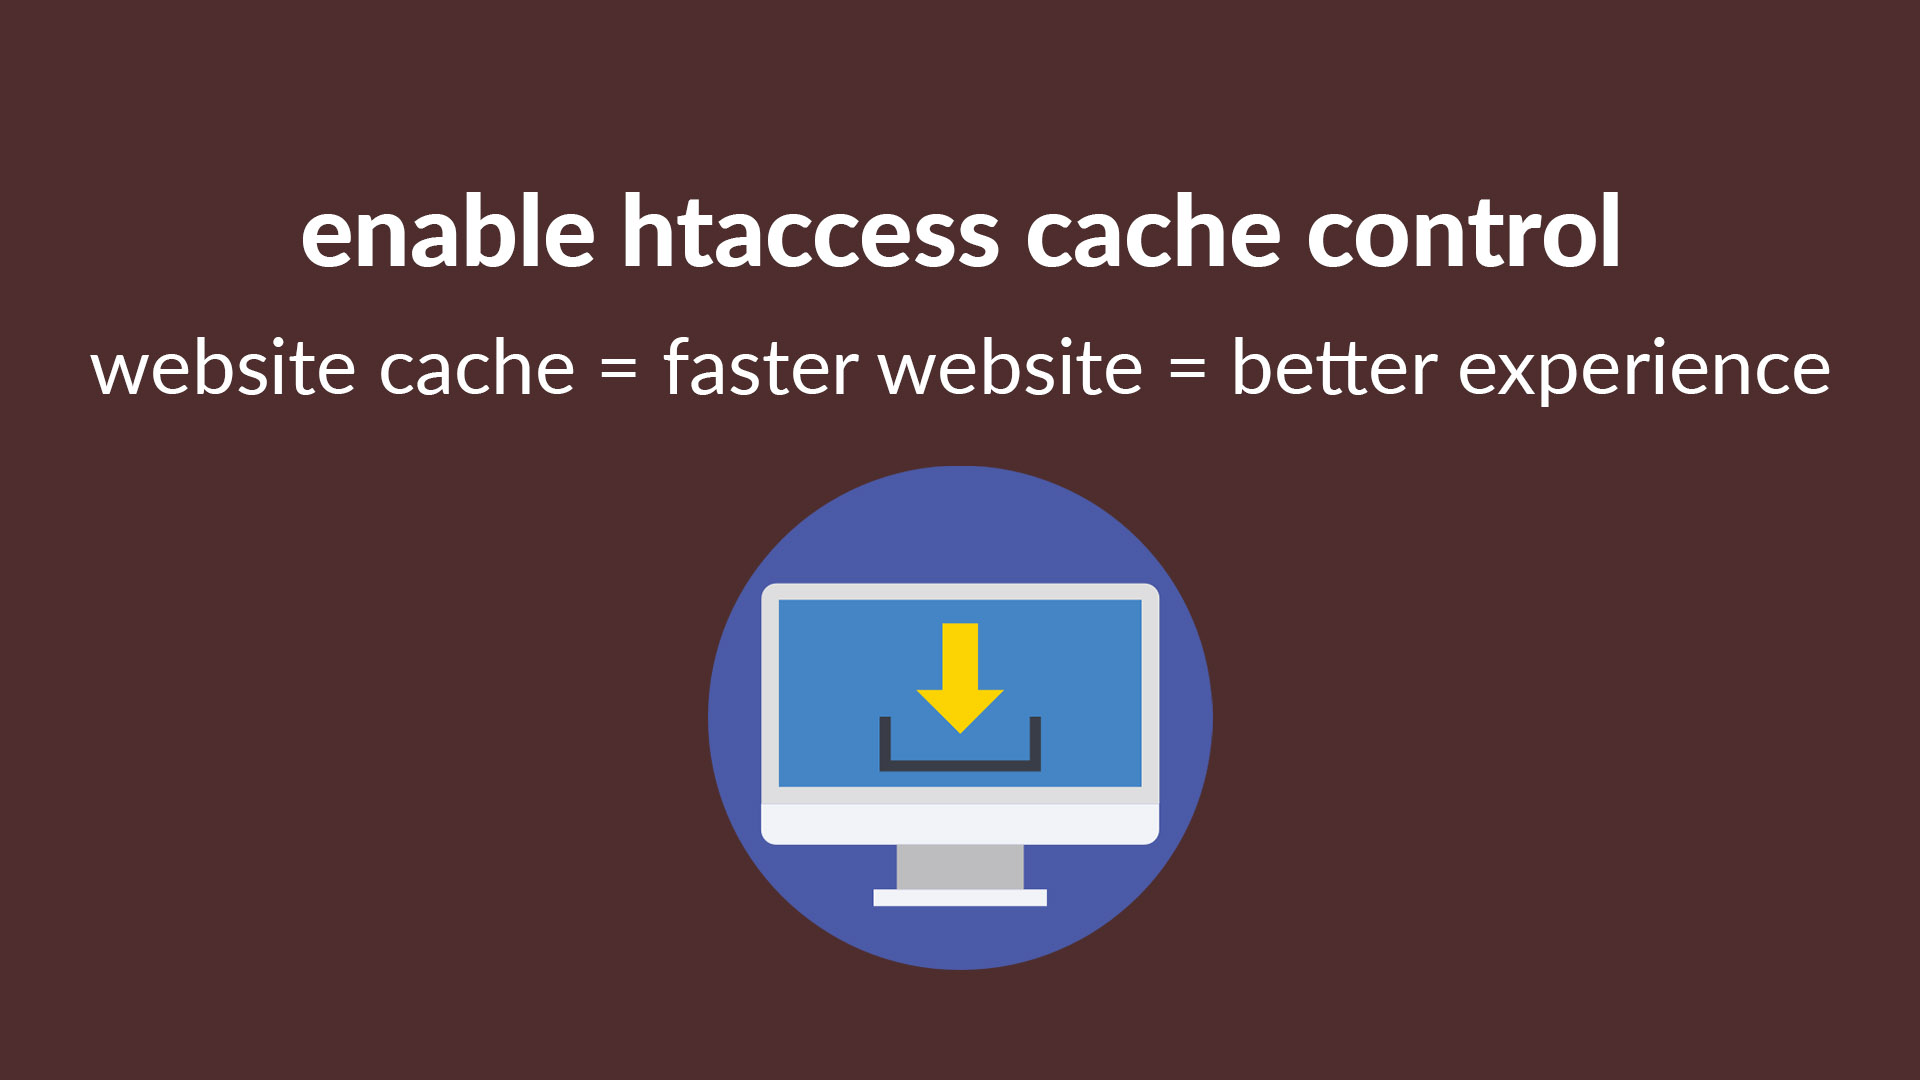 htaccess cache control for a faster website